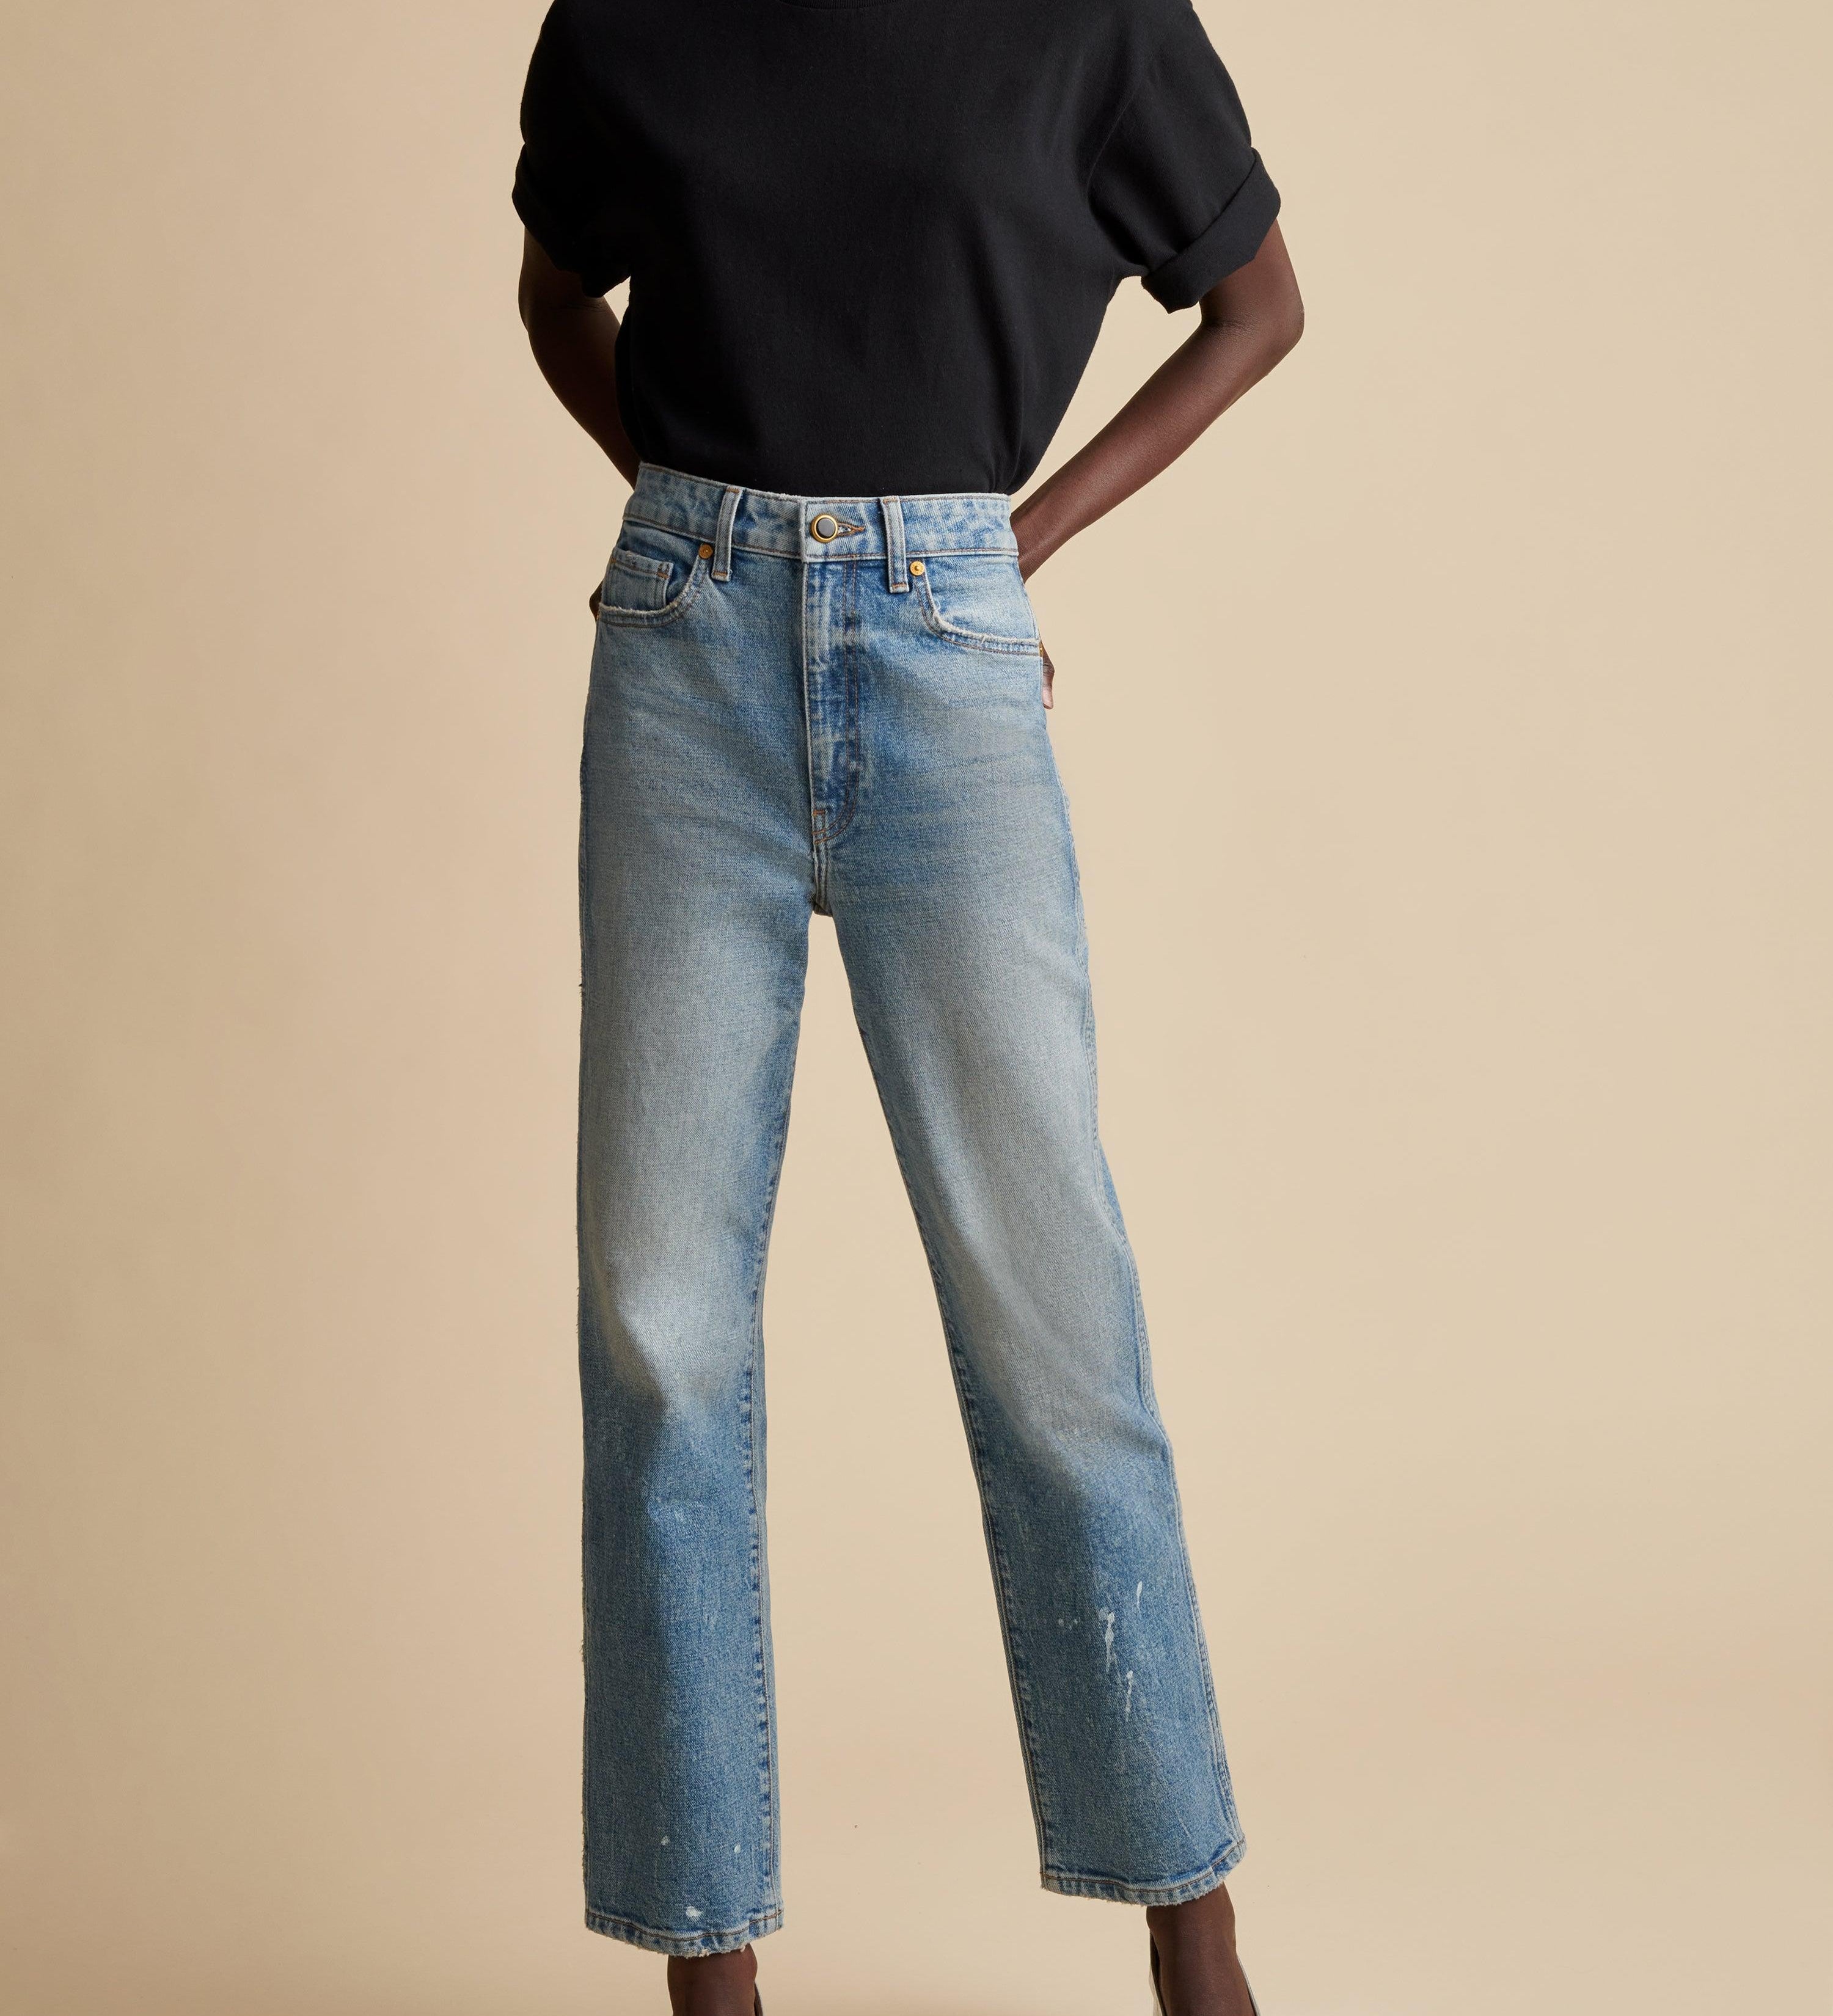 The Abigail Stretch Jean in Janesville - The Iconic Issue